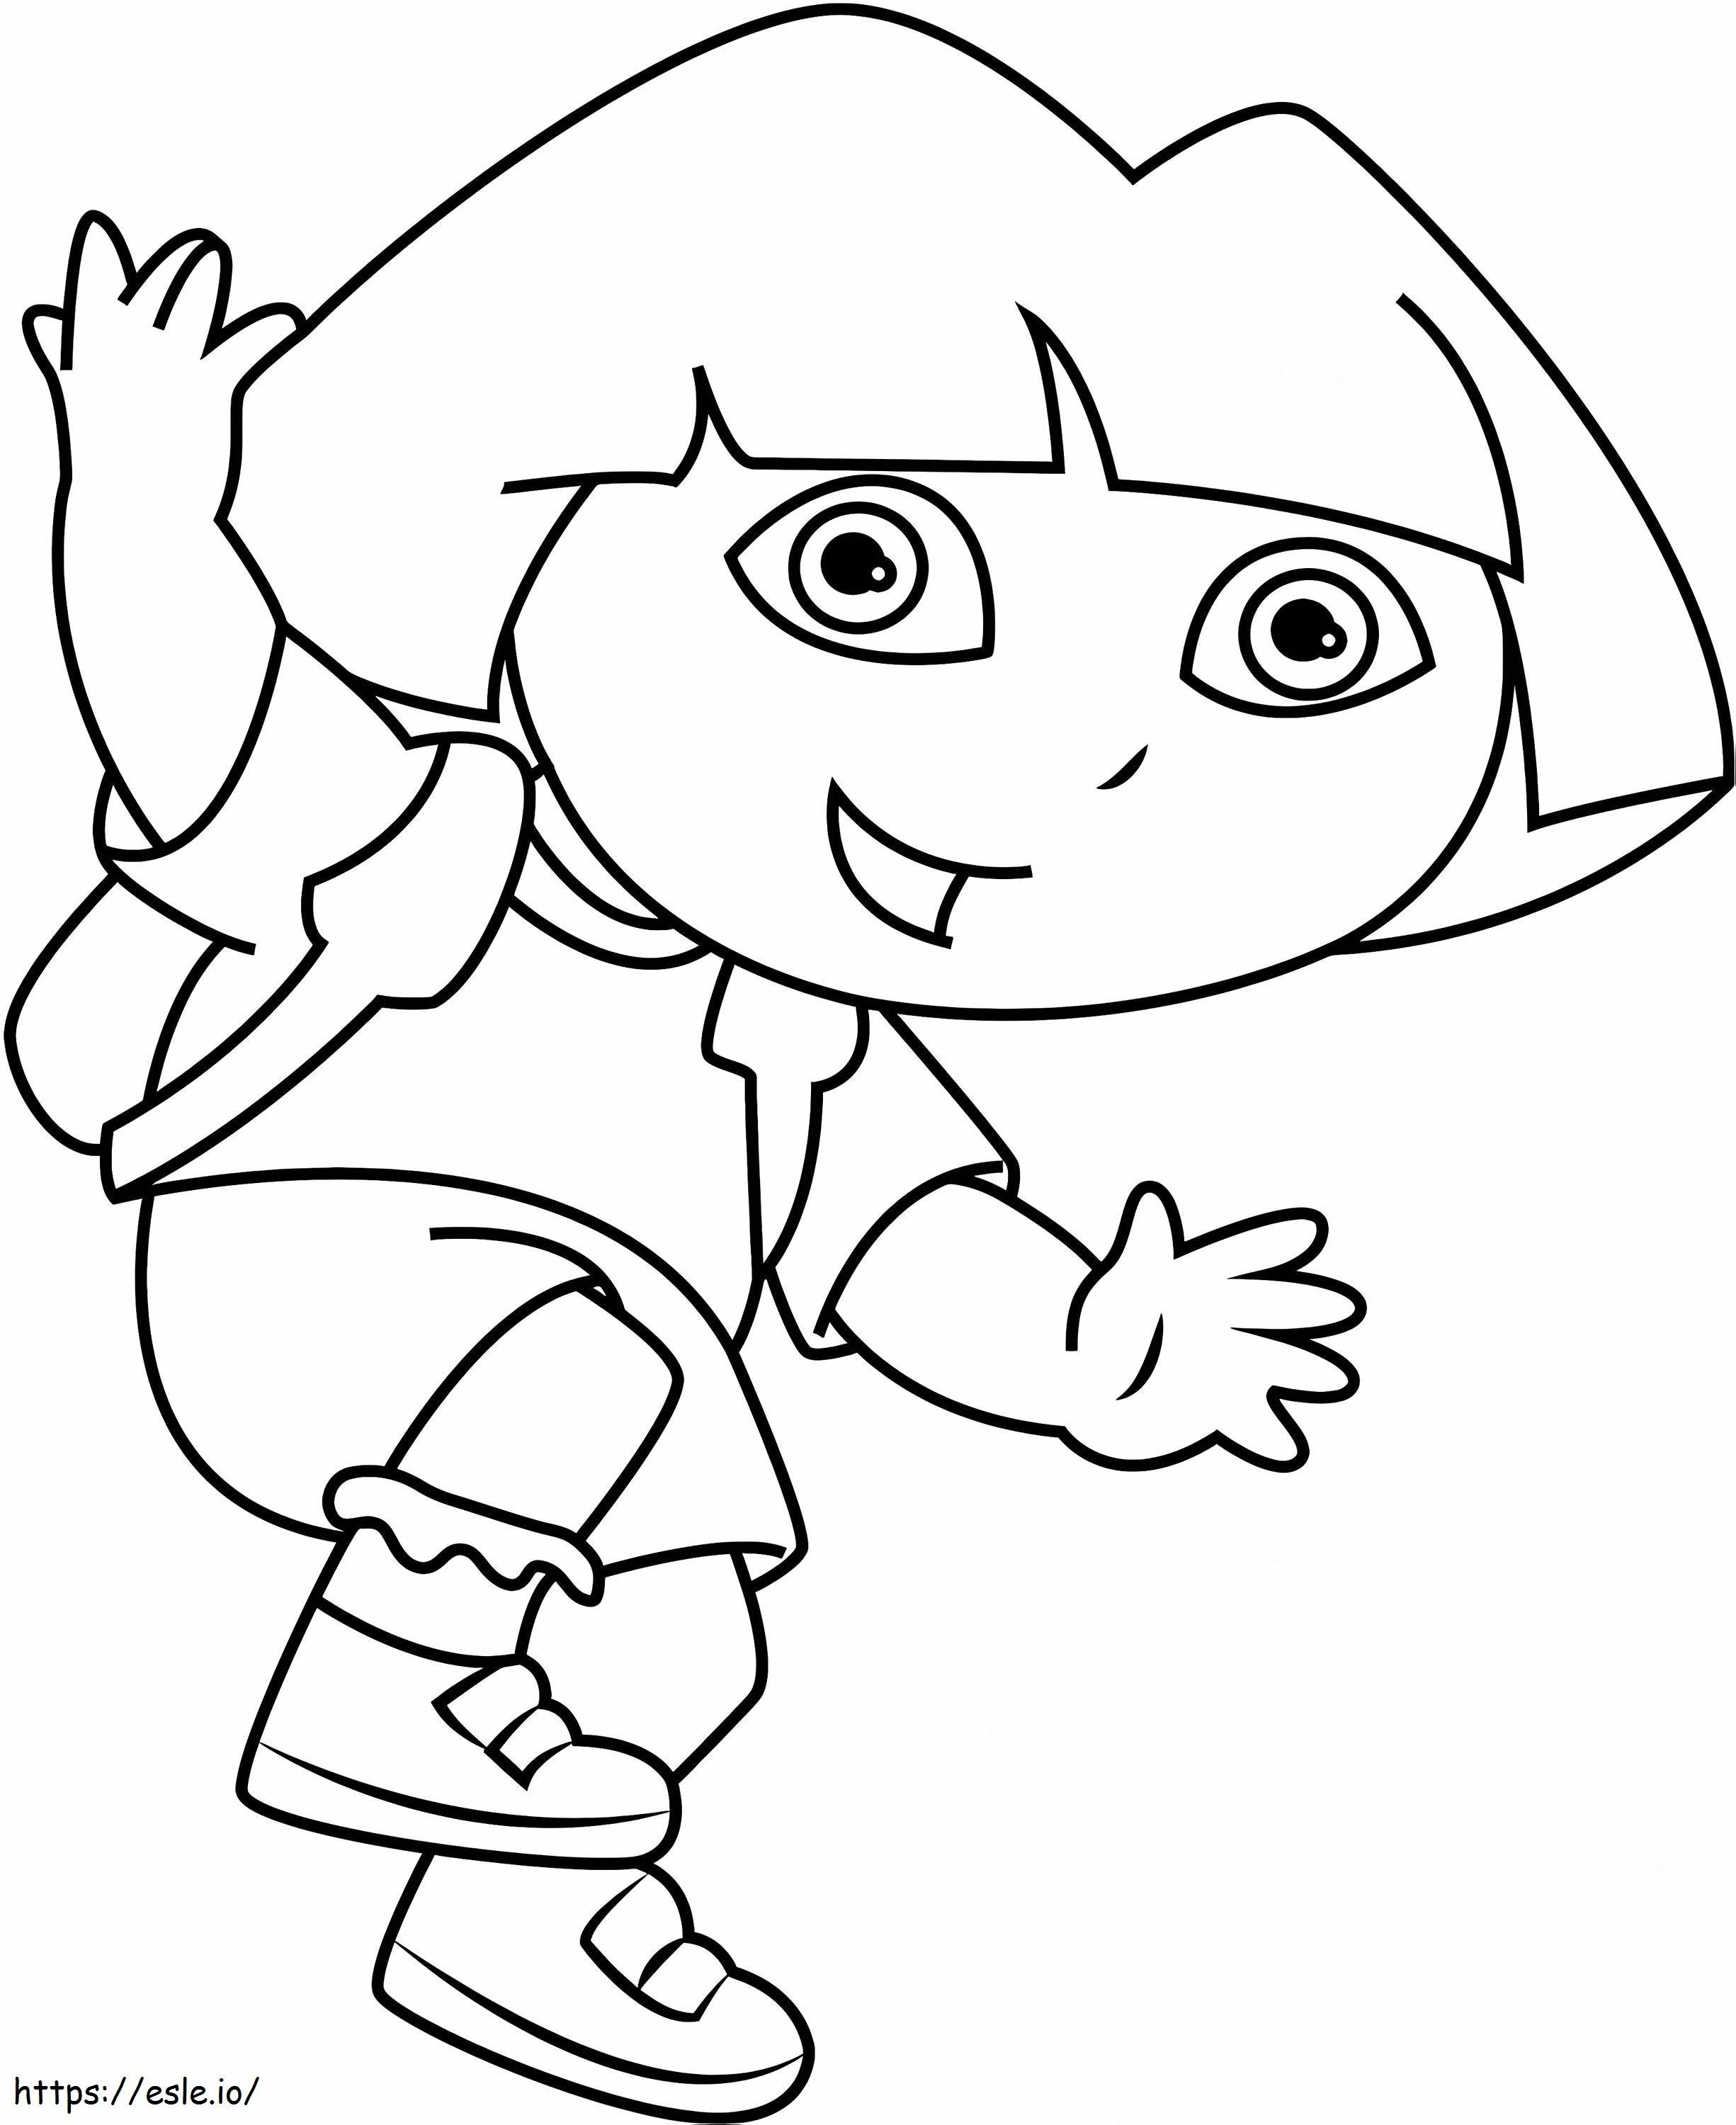 1531188071 Dora Jumping A4 coloring page